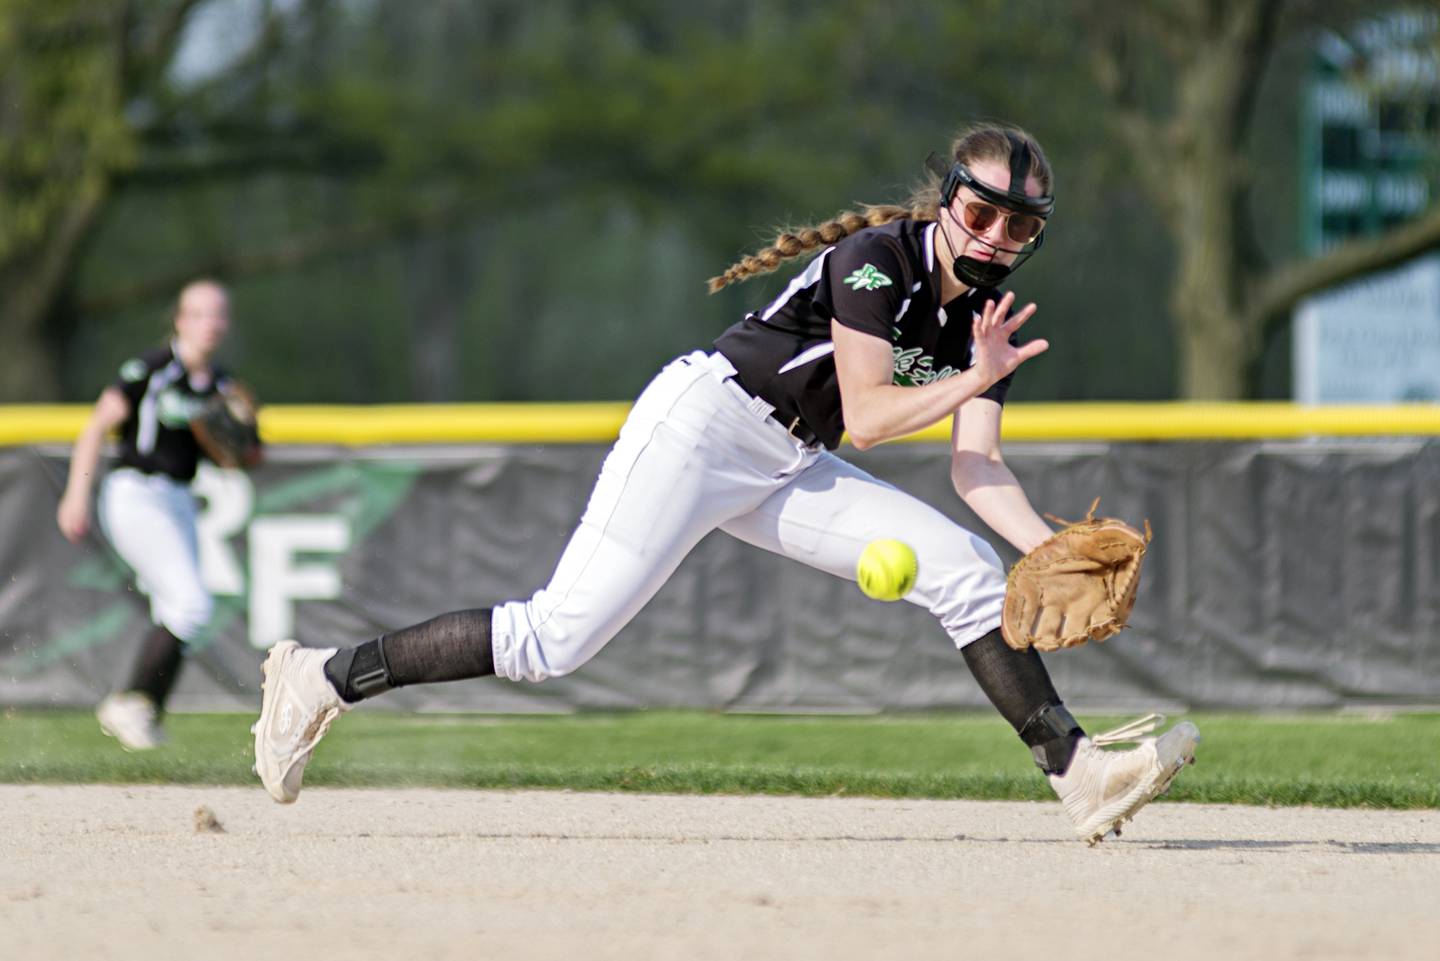 Rock Falls' Rylee Johnson snags a grounder in the gap for an out against Dixon on May 10, 2022.